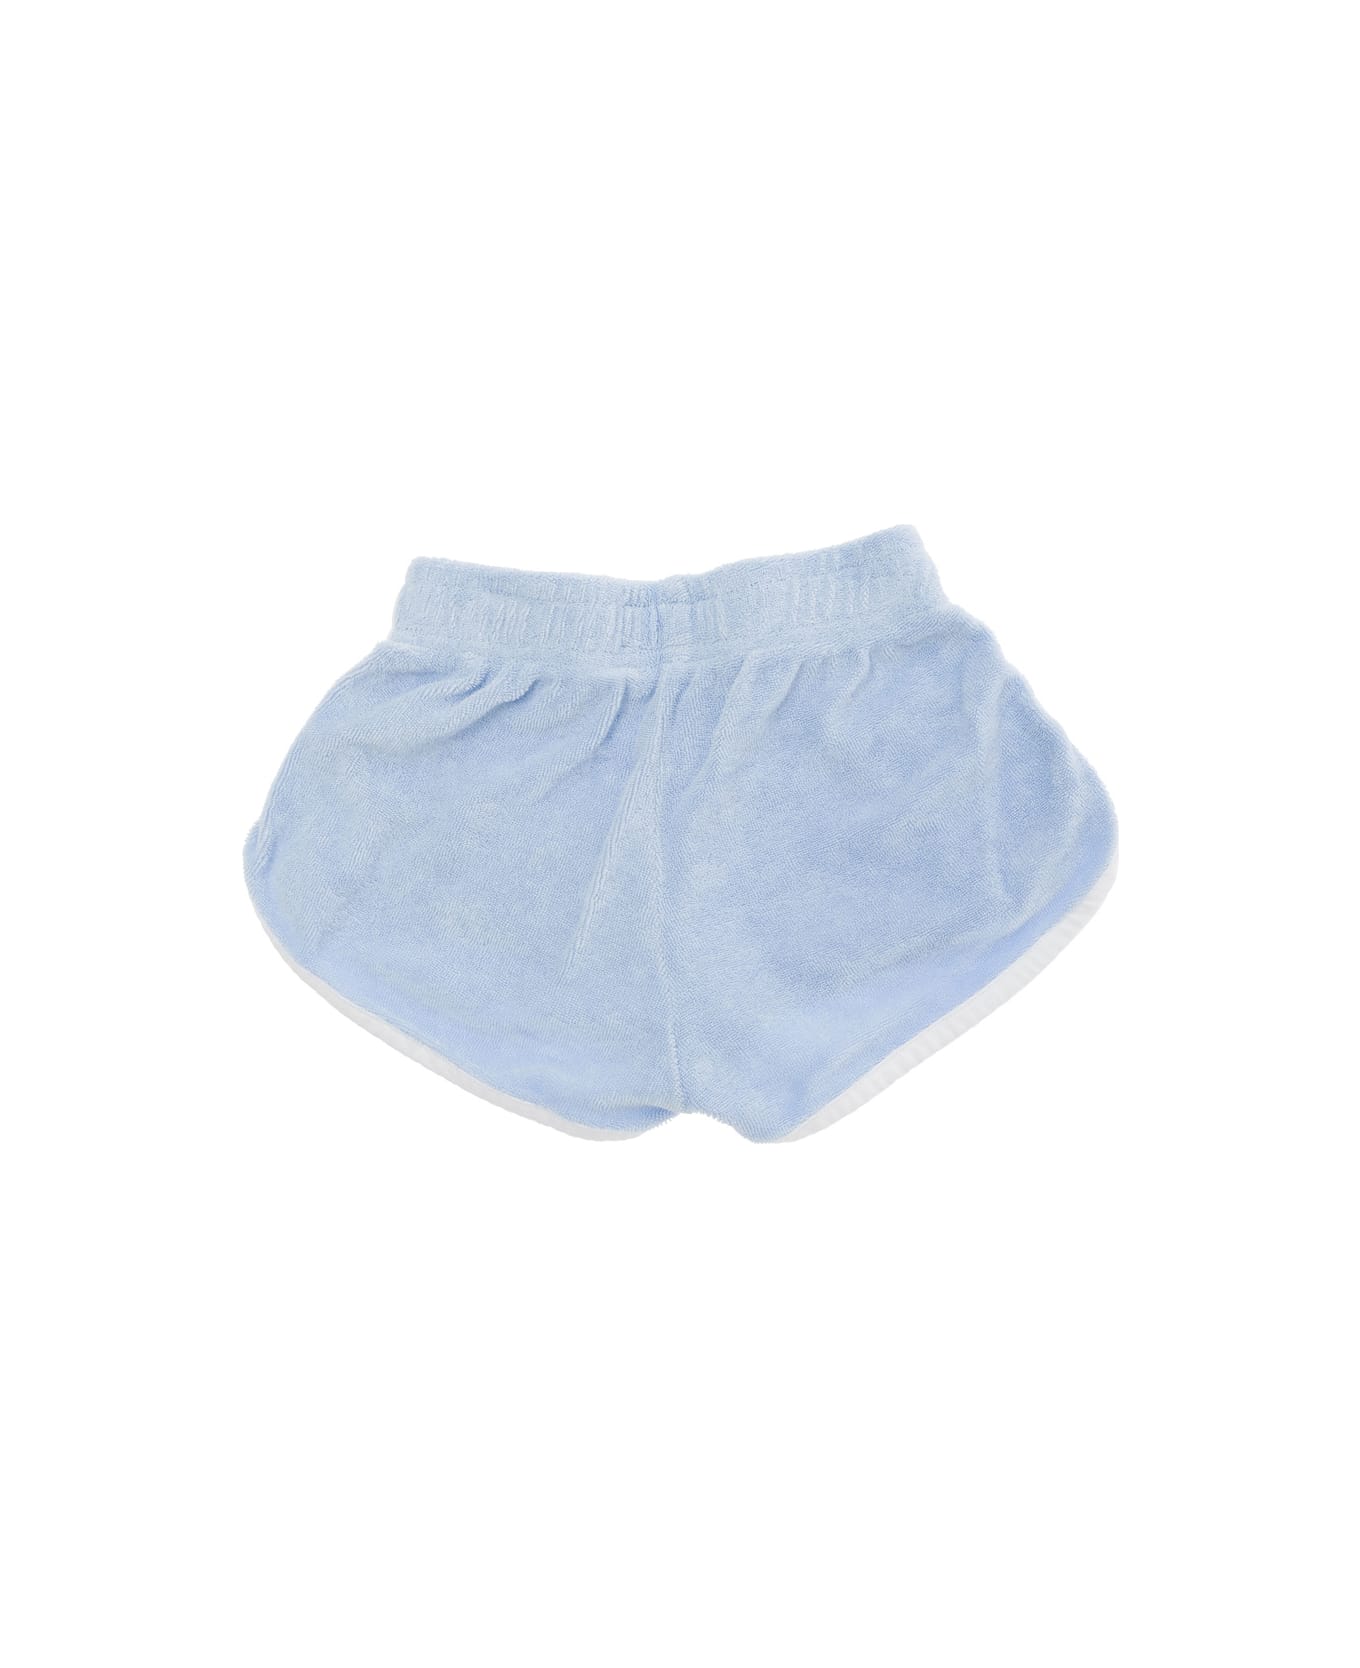 MC2 Saint Barth Light Blue Shorts With Logo Lettering Embroidery In Cotton Blend Boy - Light blue